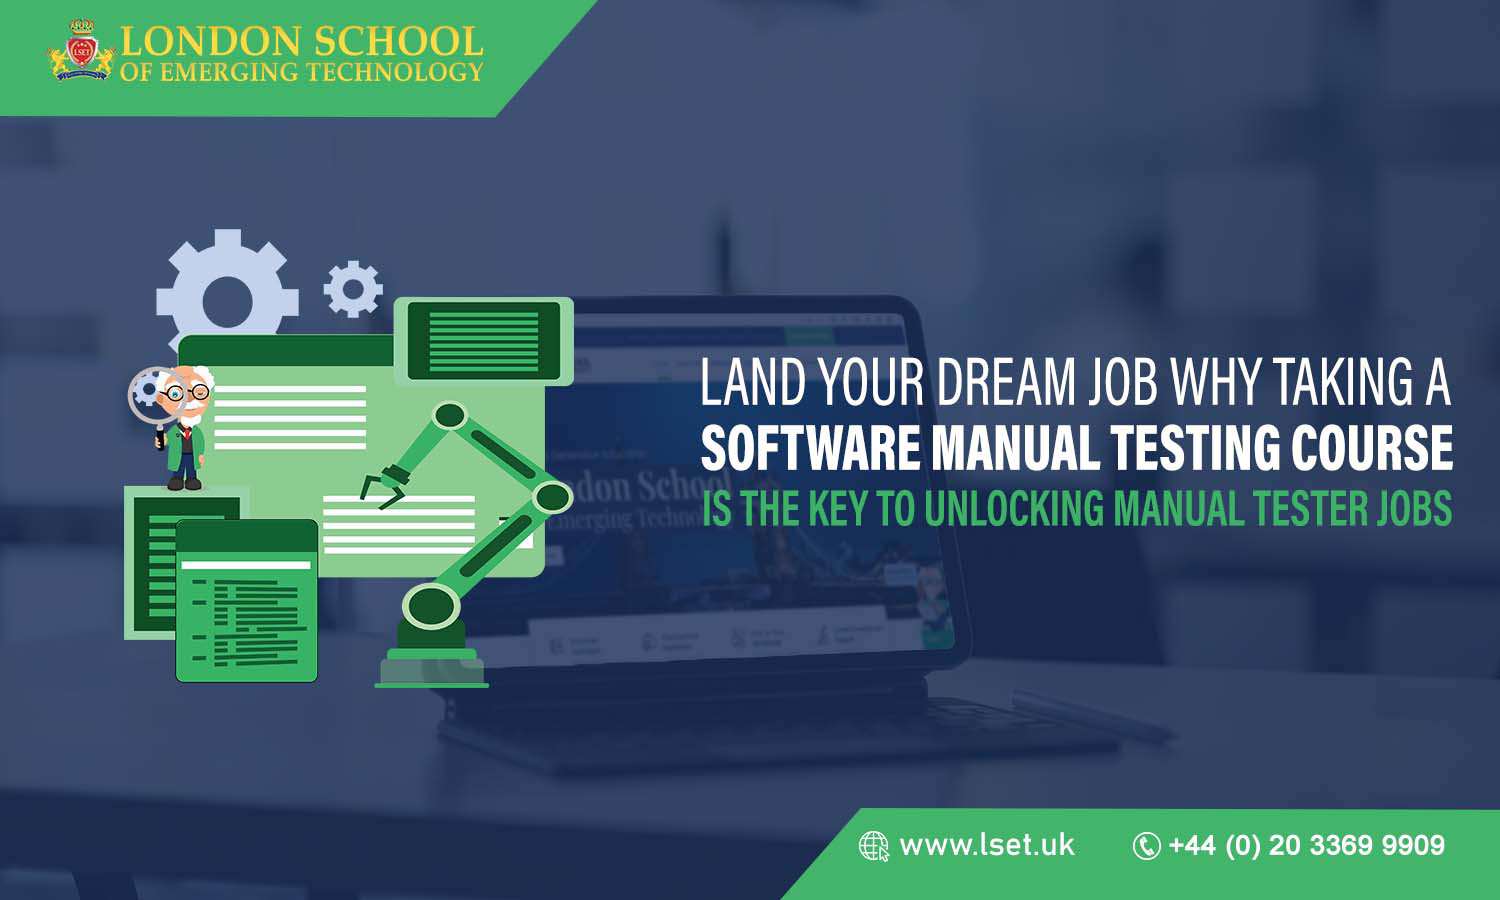 Land Your Dream Job Why Taking a Software Manual Testing Course is the Key to Unlocking Manual Tester Jobs